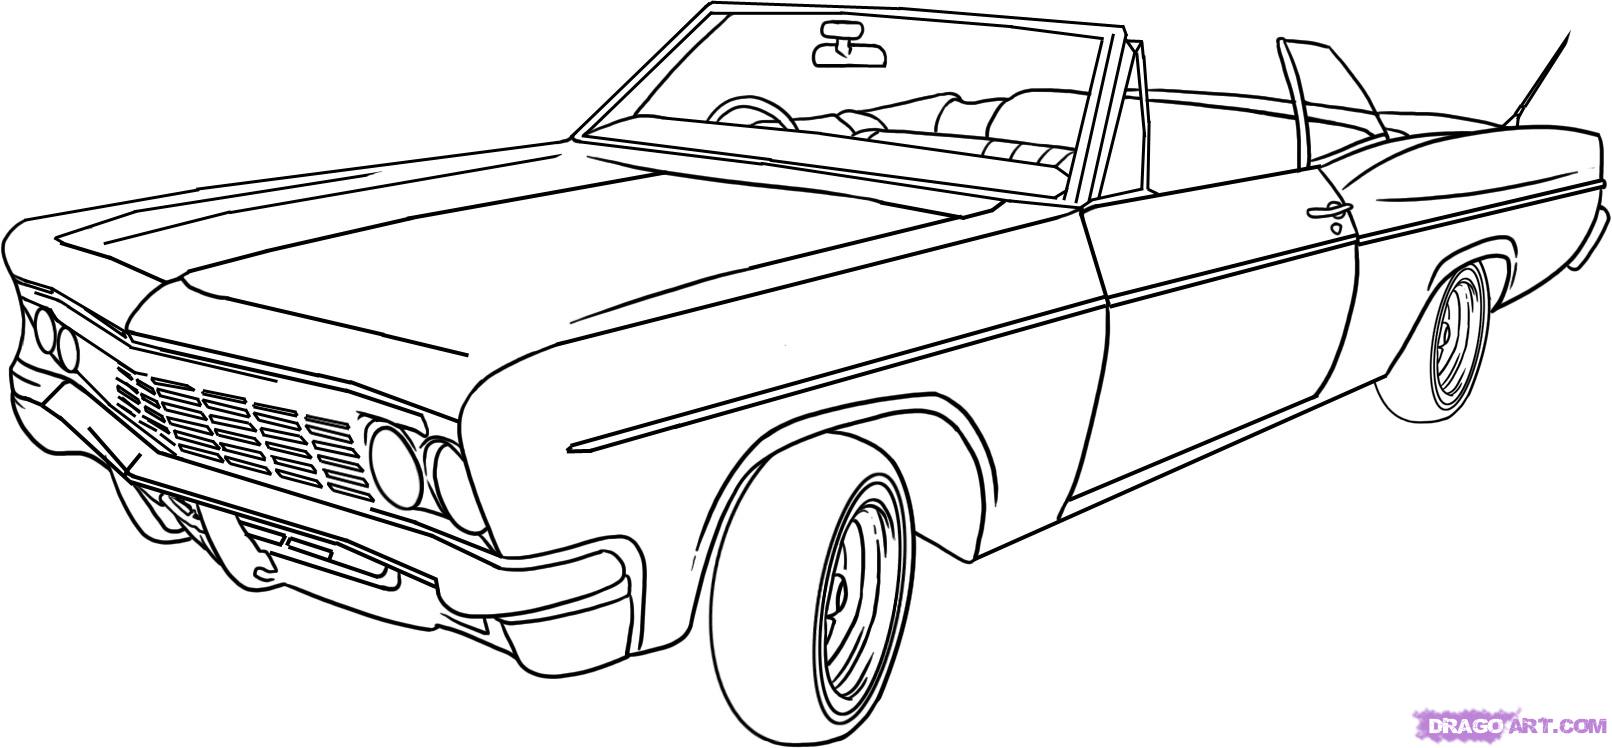 How to Draw a Lowrider, Step by Step, Cars, Draw Cars Online ...